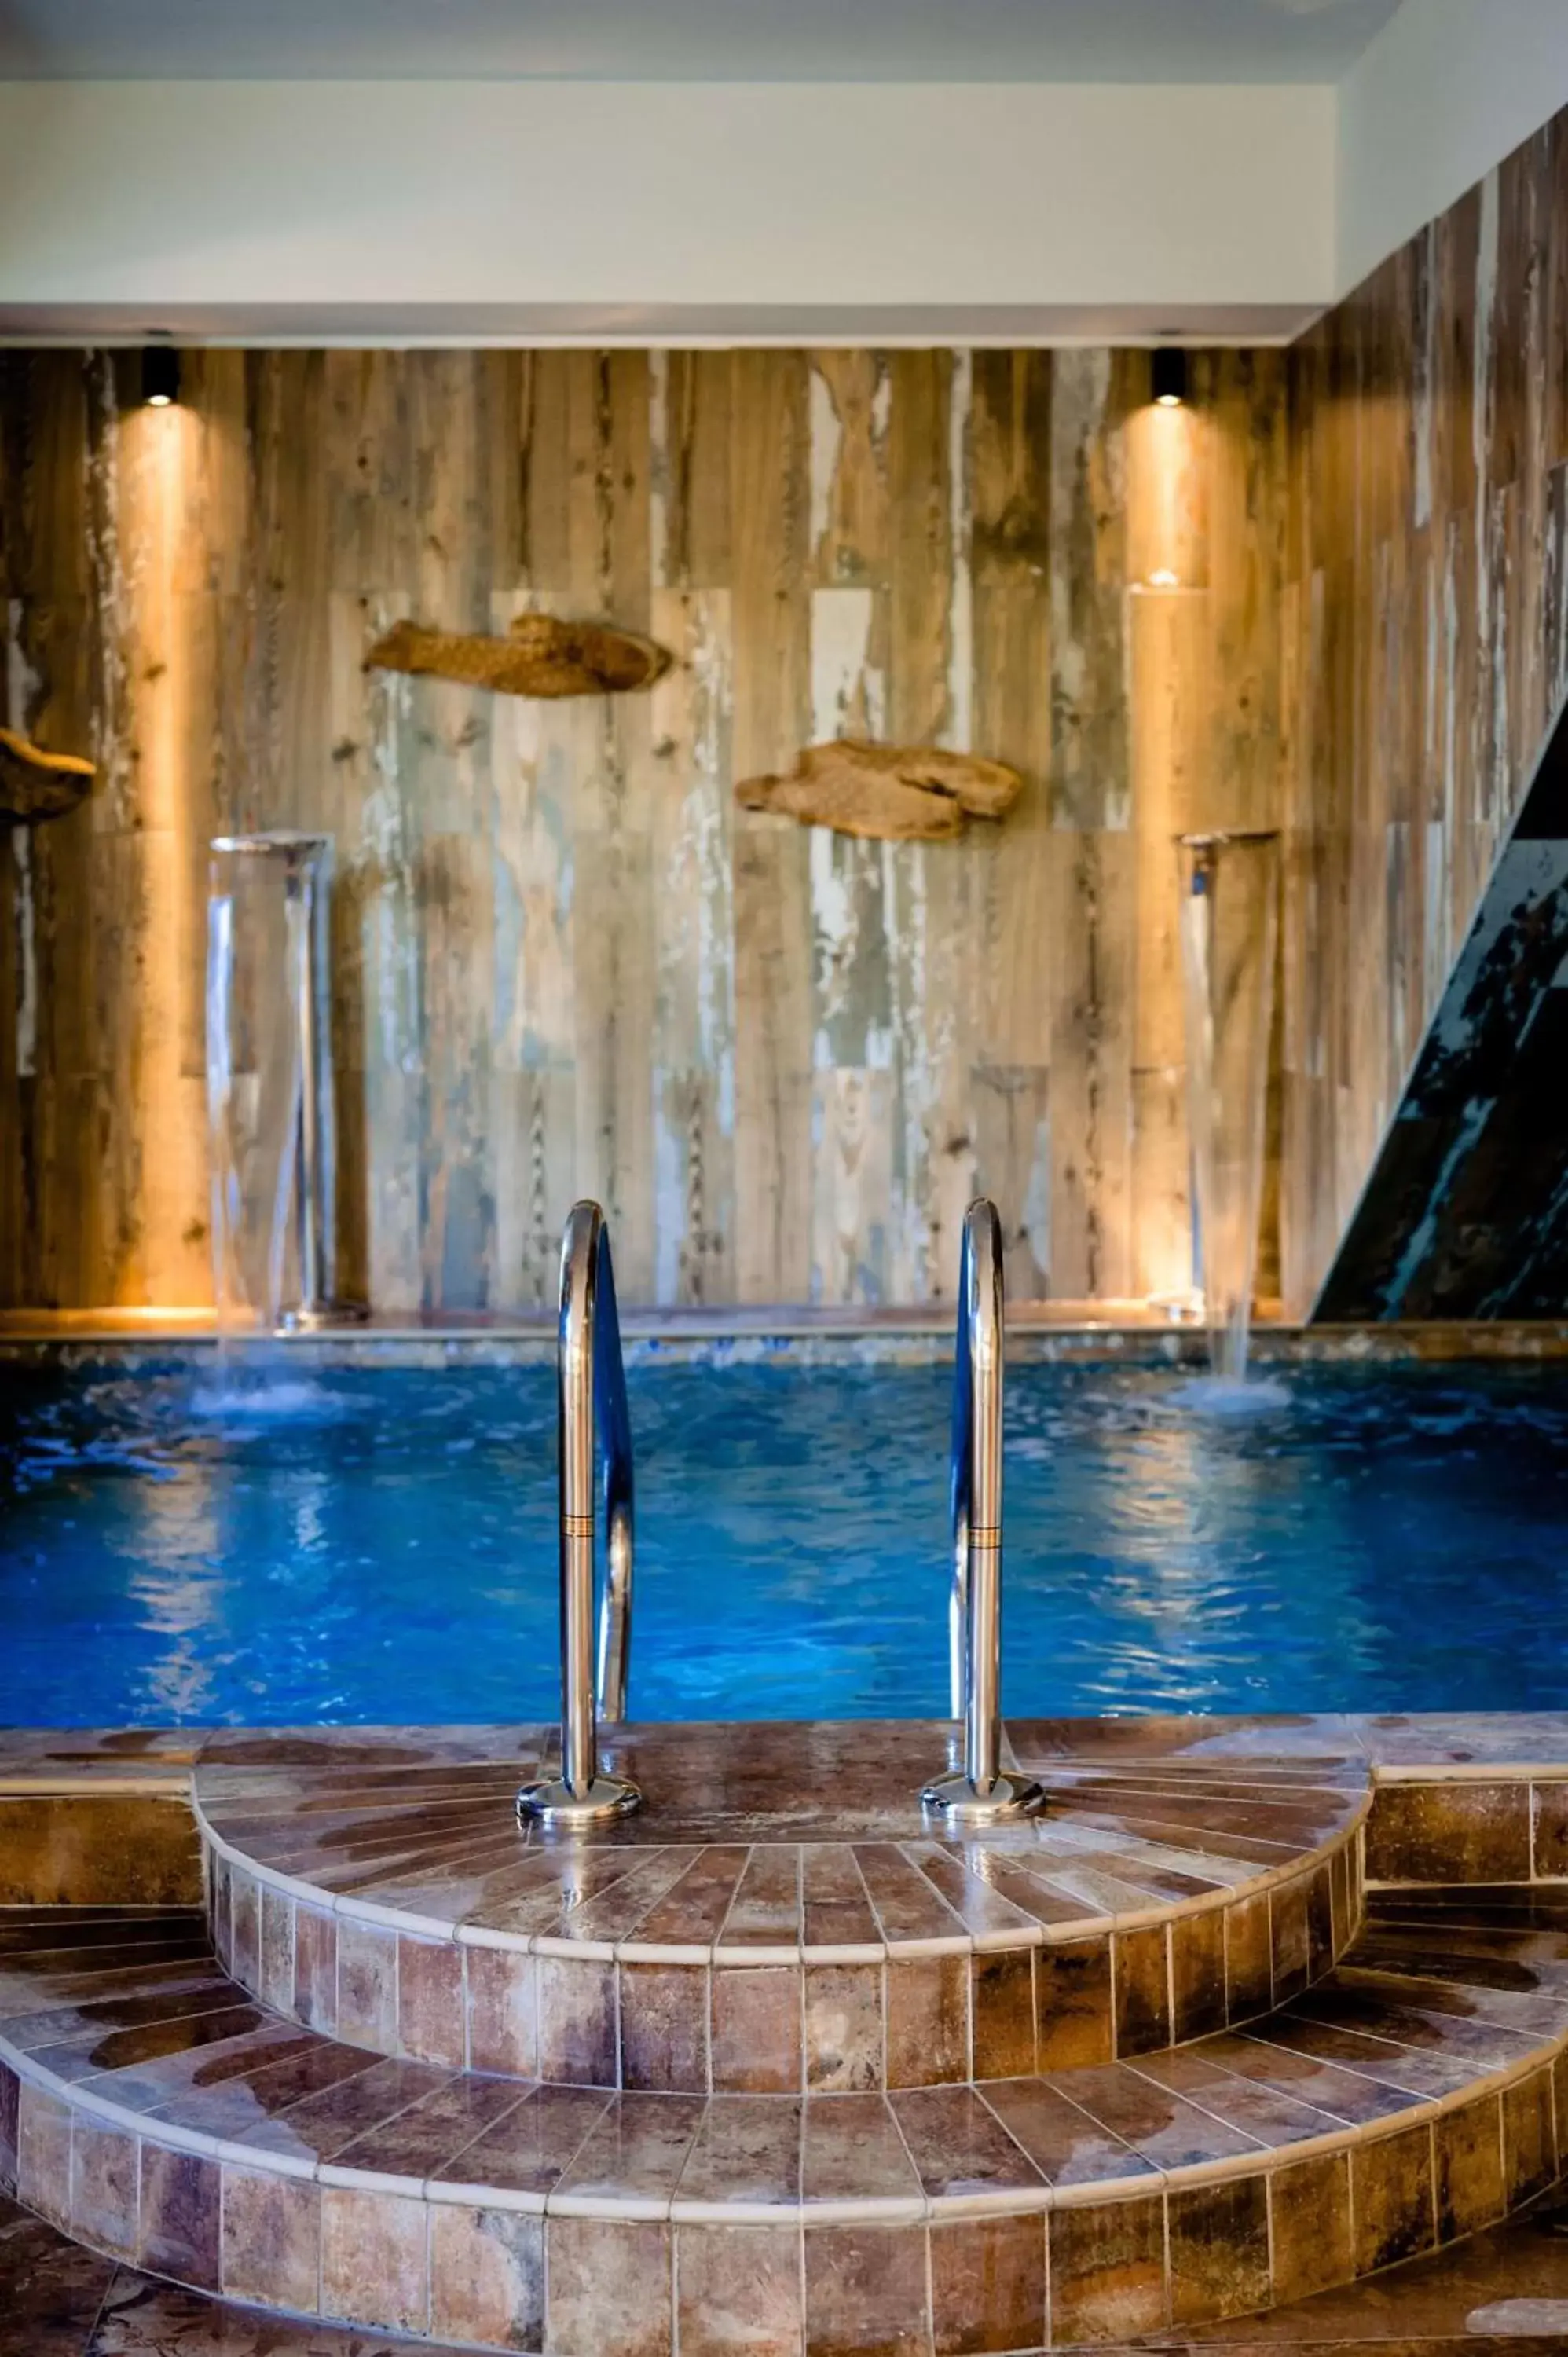 Swimming Pool in Le Hameau Des Pesquiers Ecolodge & Spa, Curio Collection By Hilton